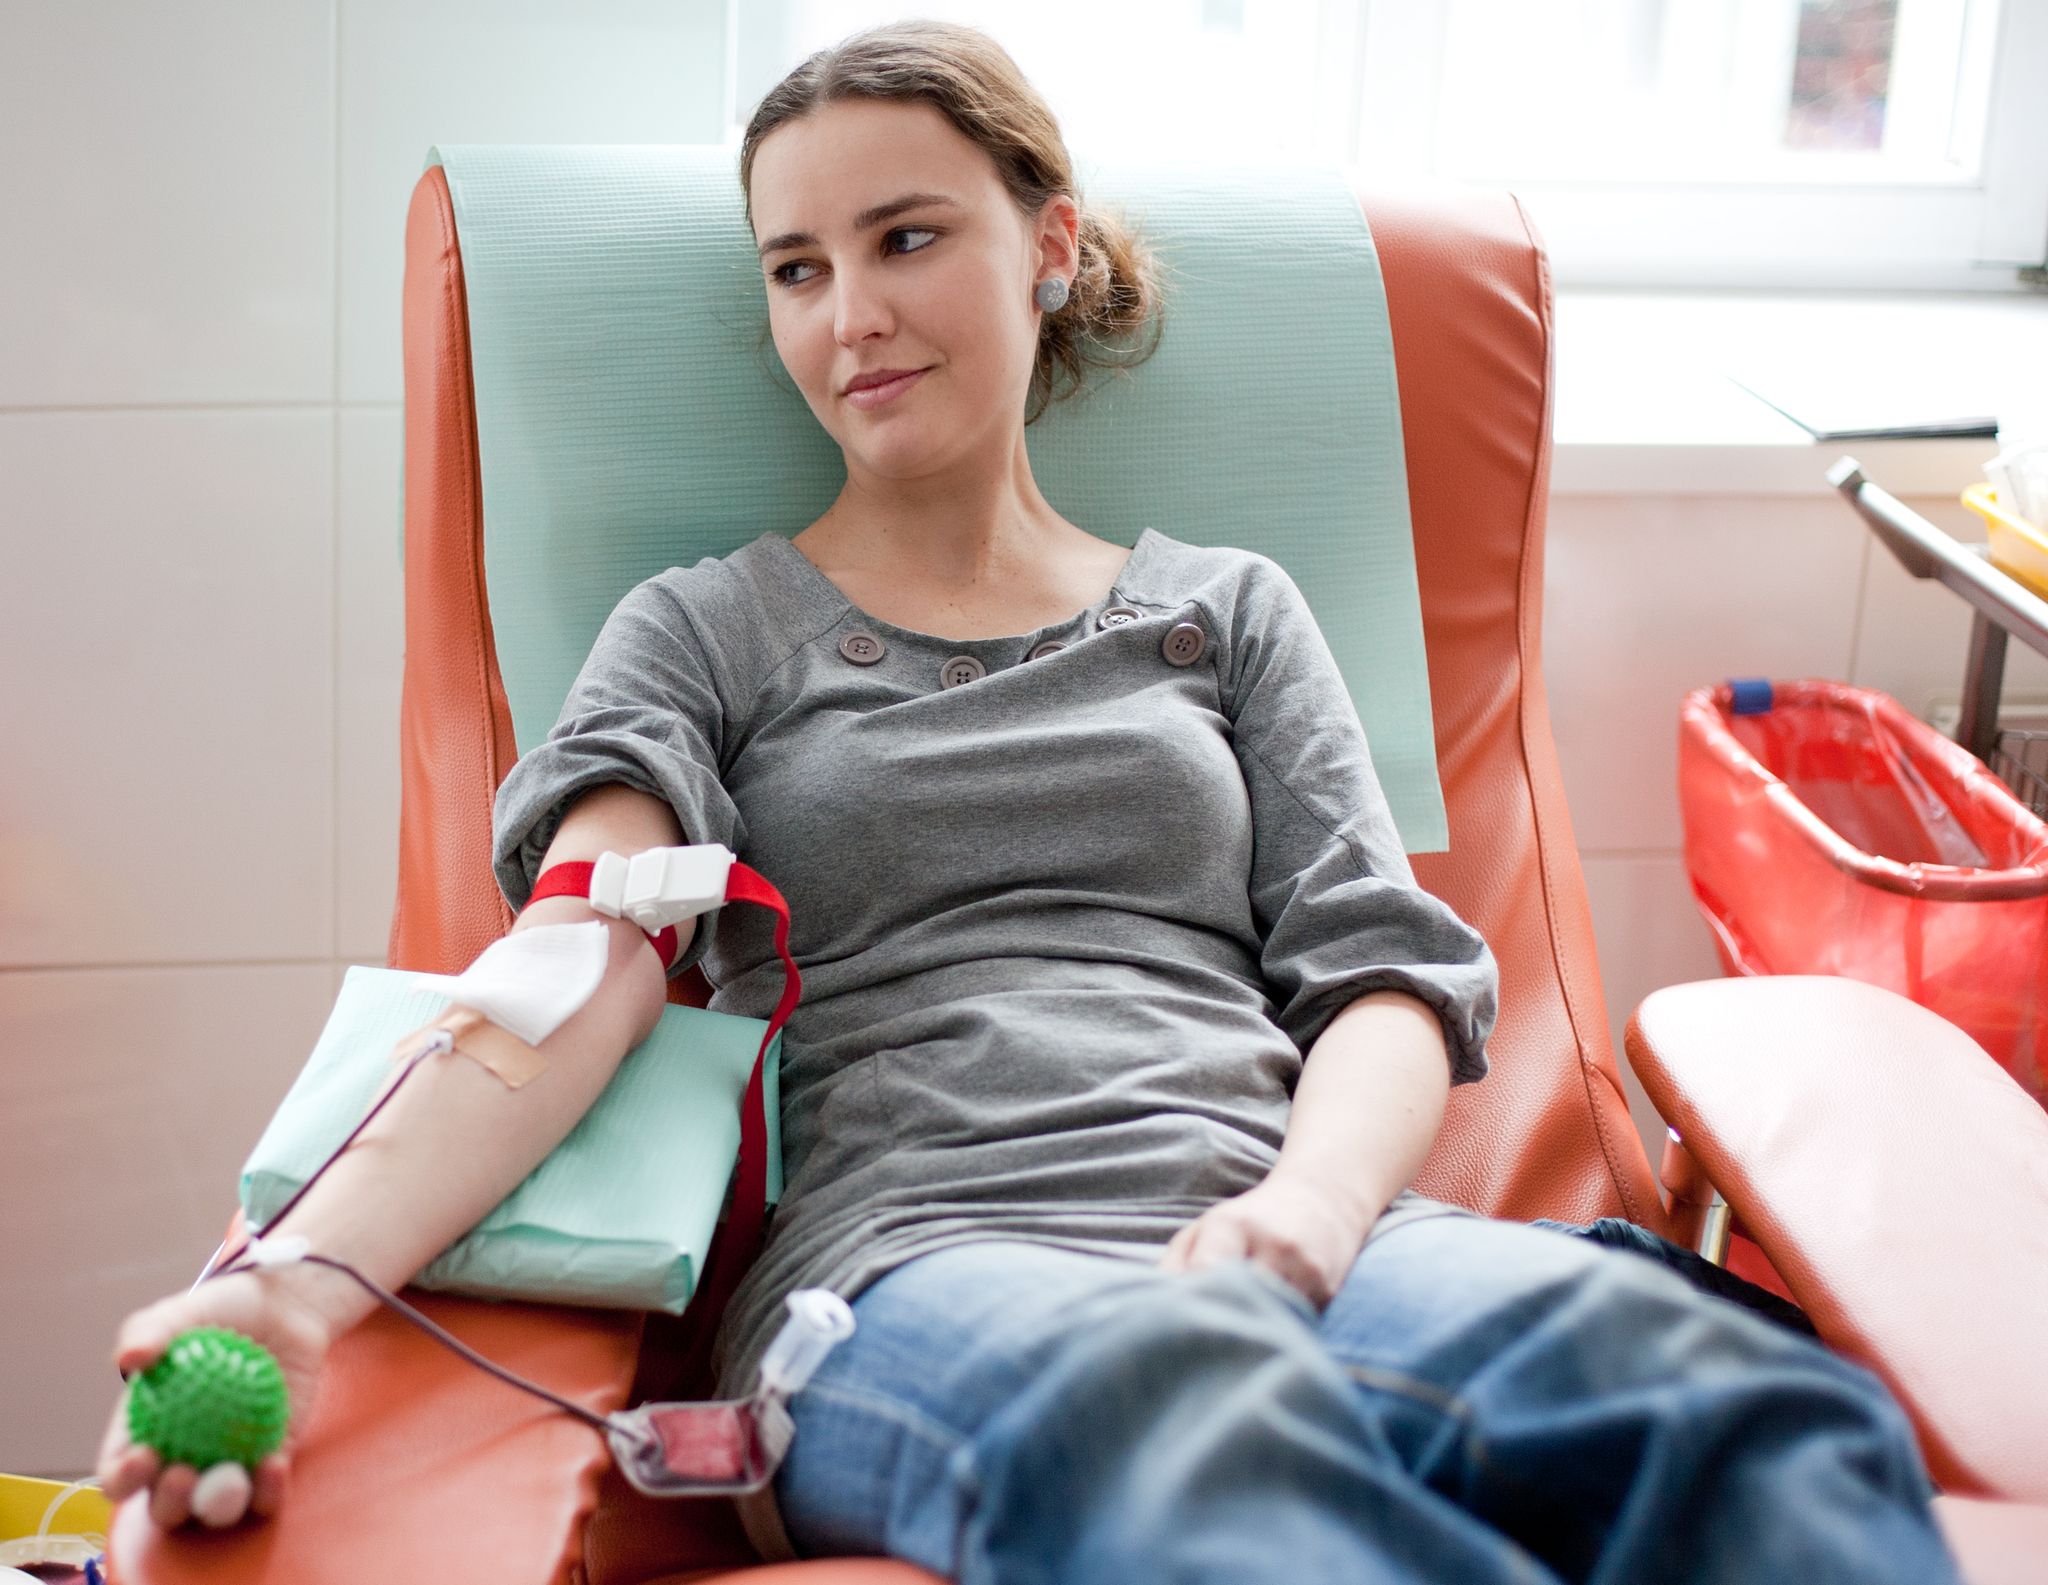 Can I give blood? Things every woman should know about donating